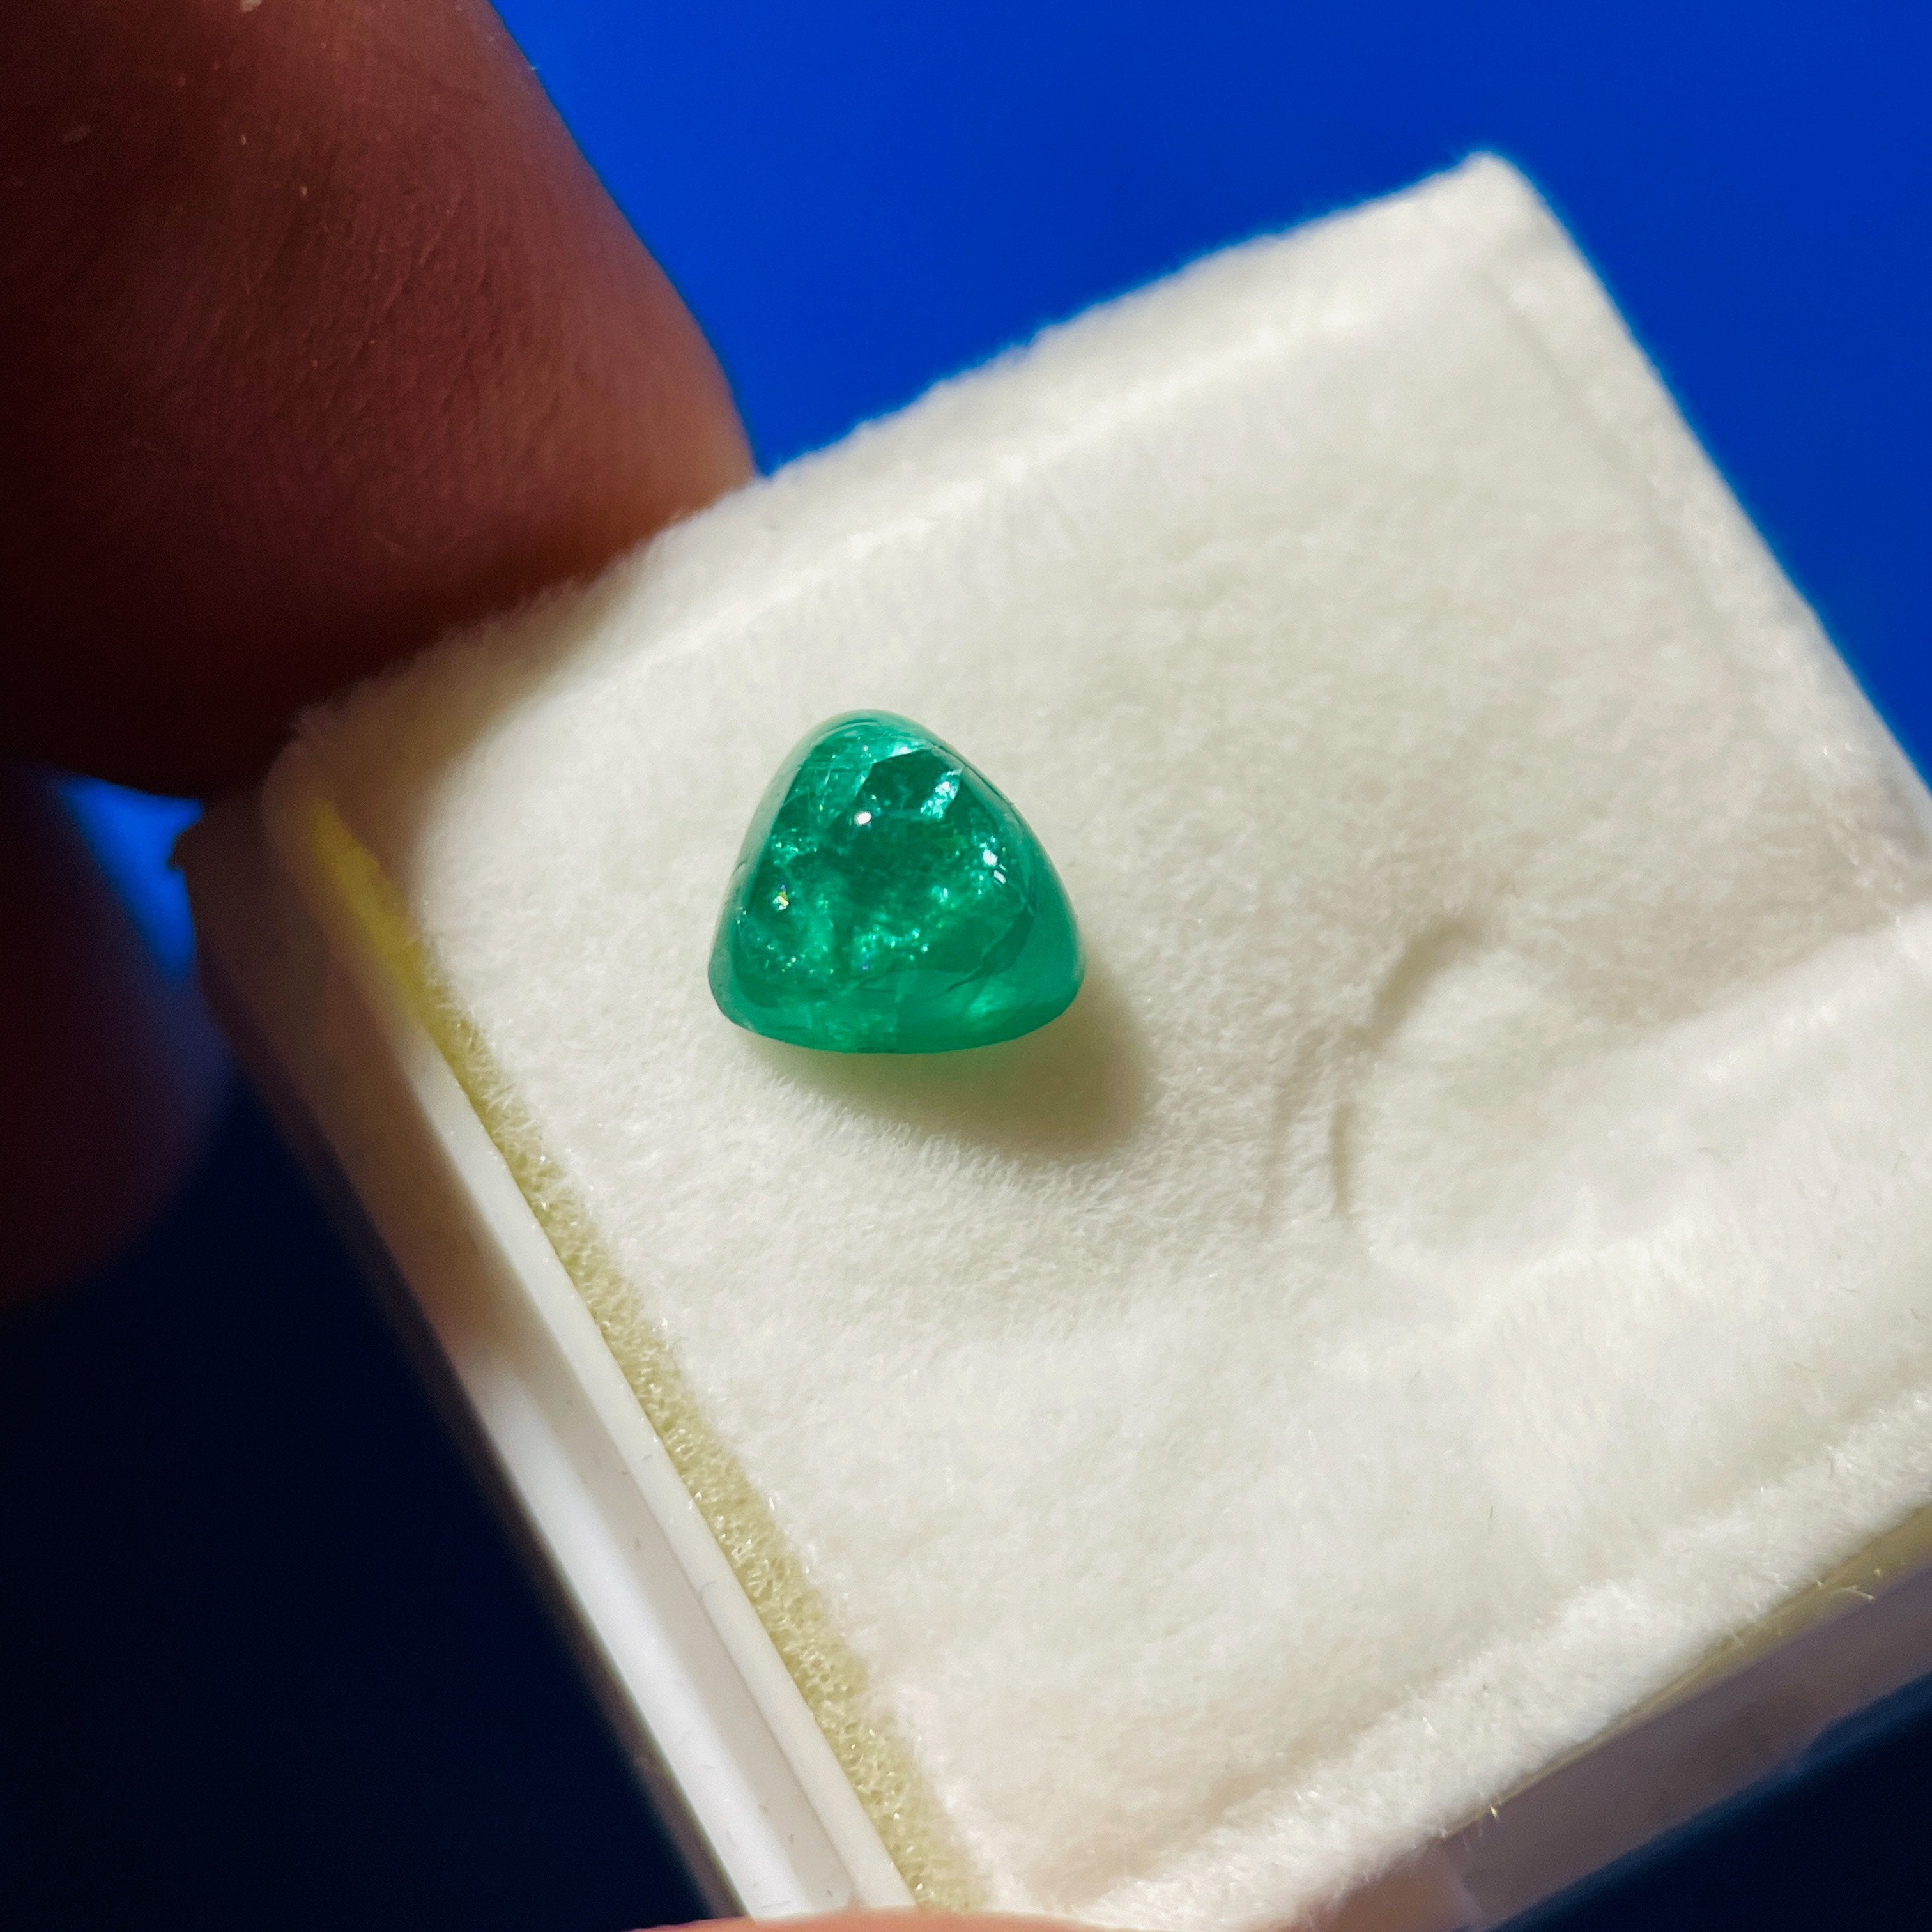 1.07Ct Emerald Tanzania No Oil Added But Some Labs May Describe The Stone As Minor Oil Or